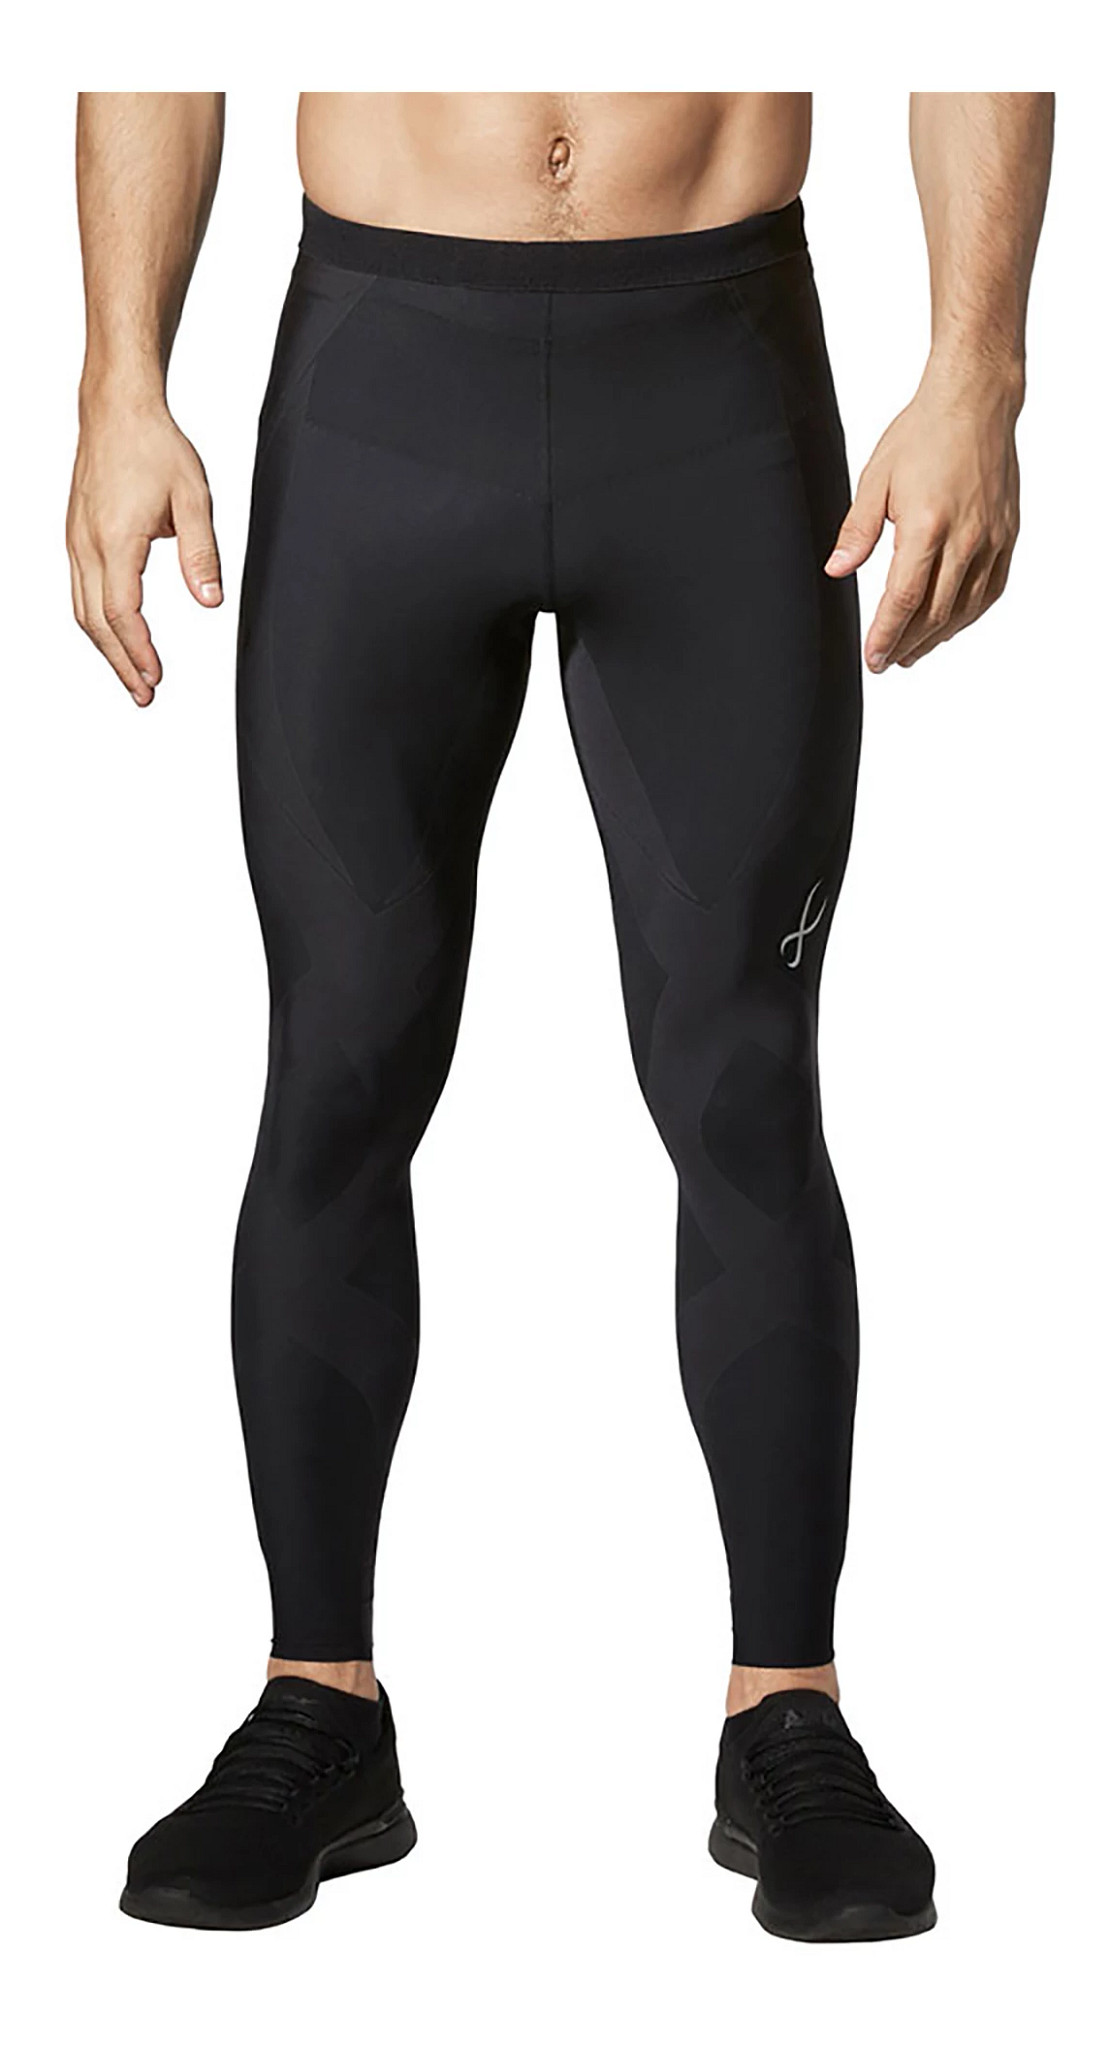 Men's CW-X Generator Revolution 2.0 Joint & Muscle Tights